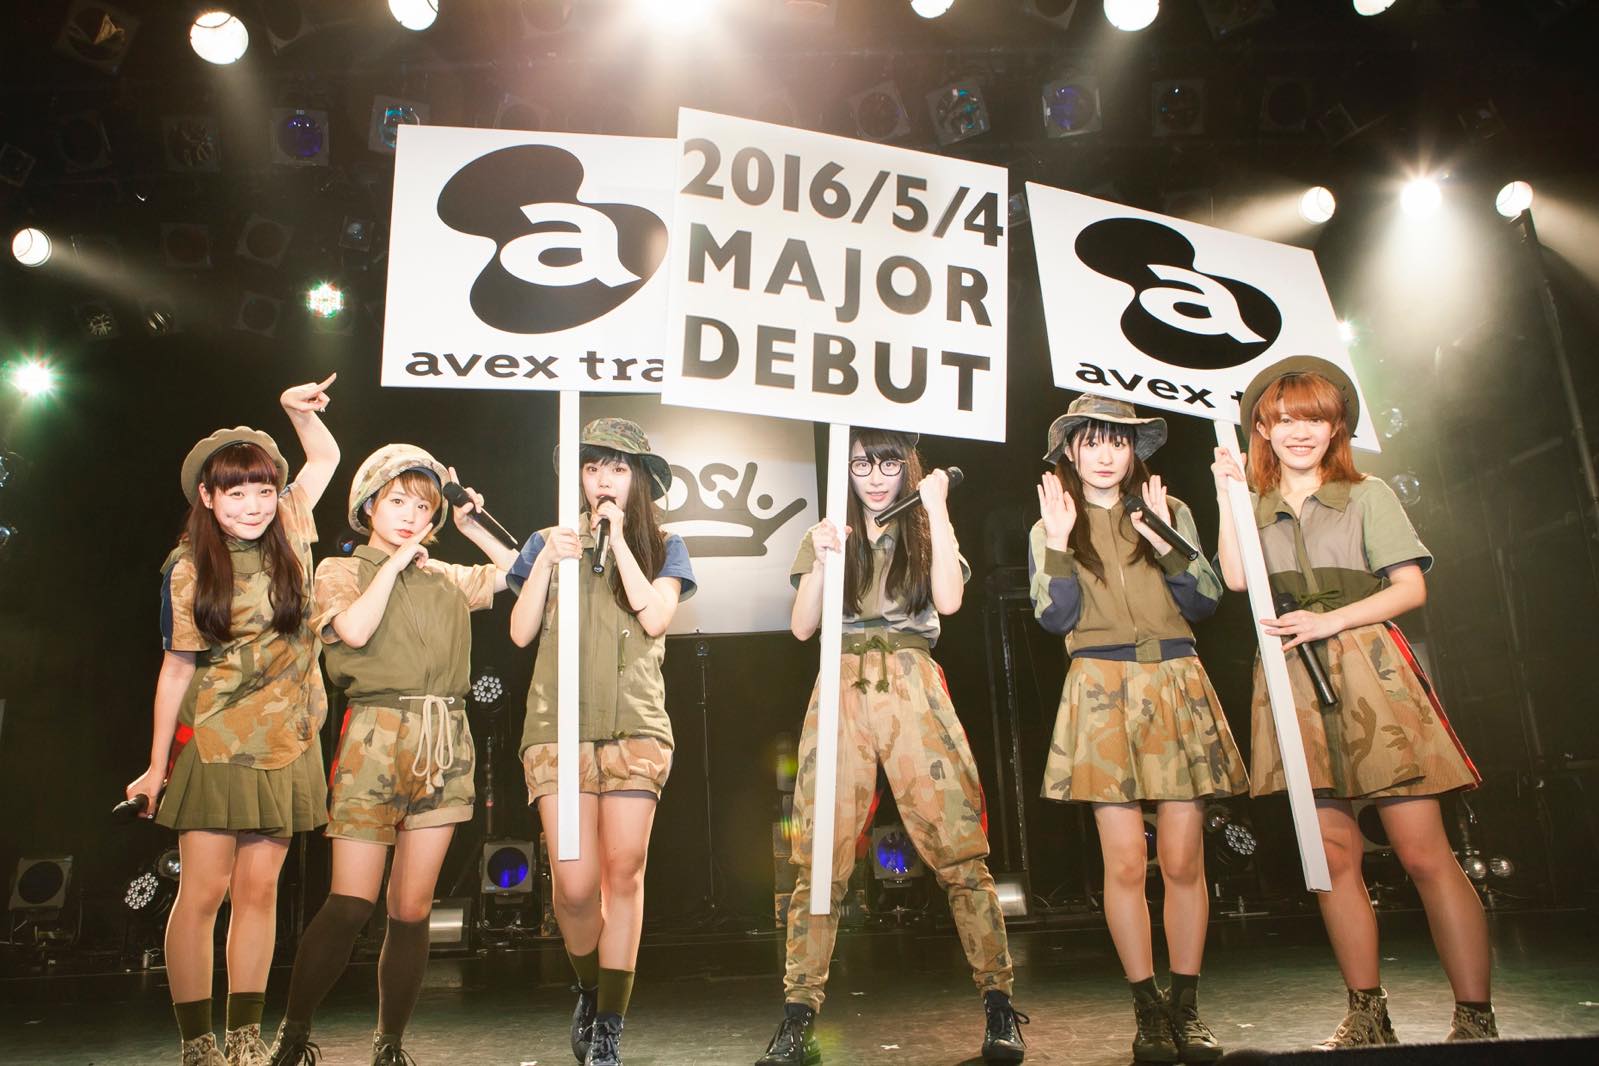 BiSH Takes a Step Toward the Budokan With Major Label Debut From Avex!